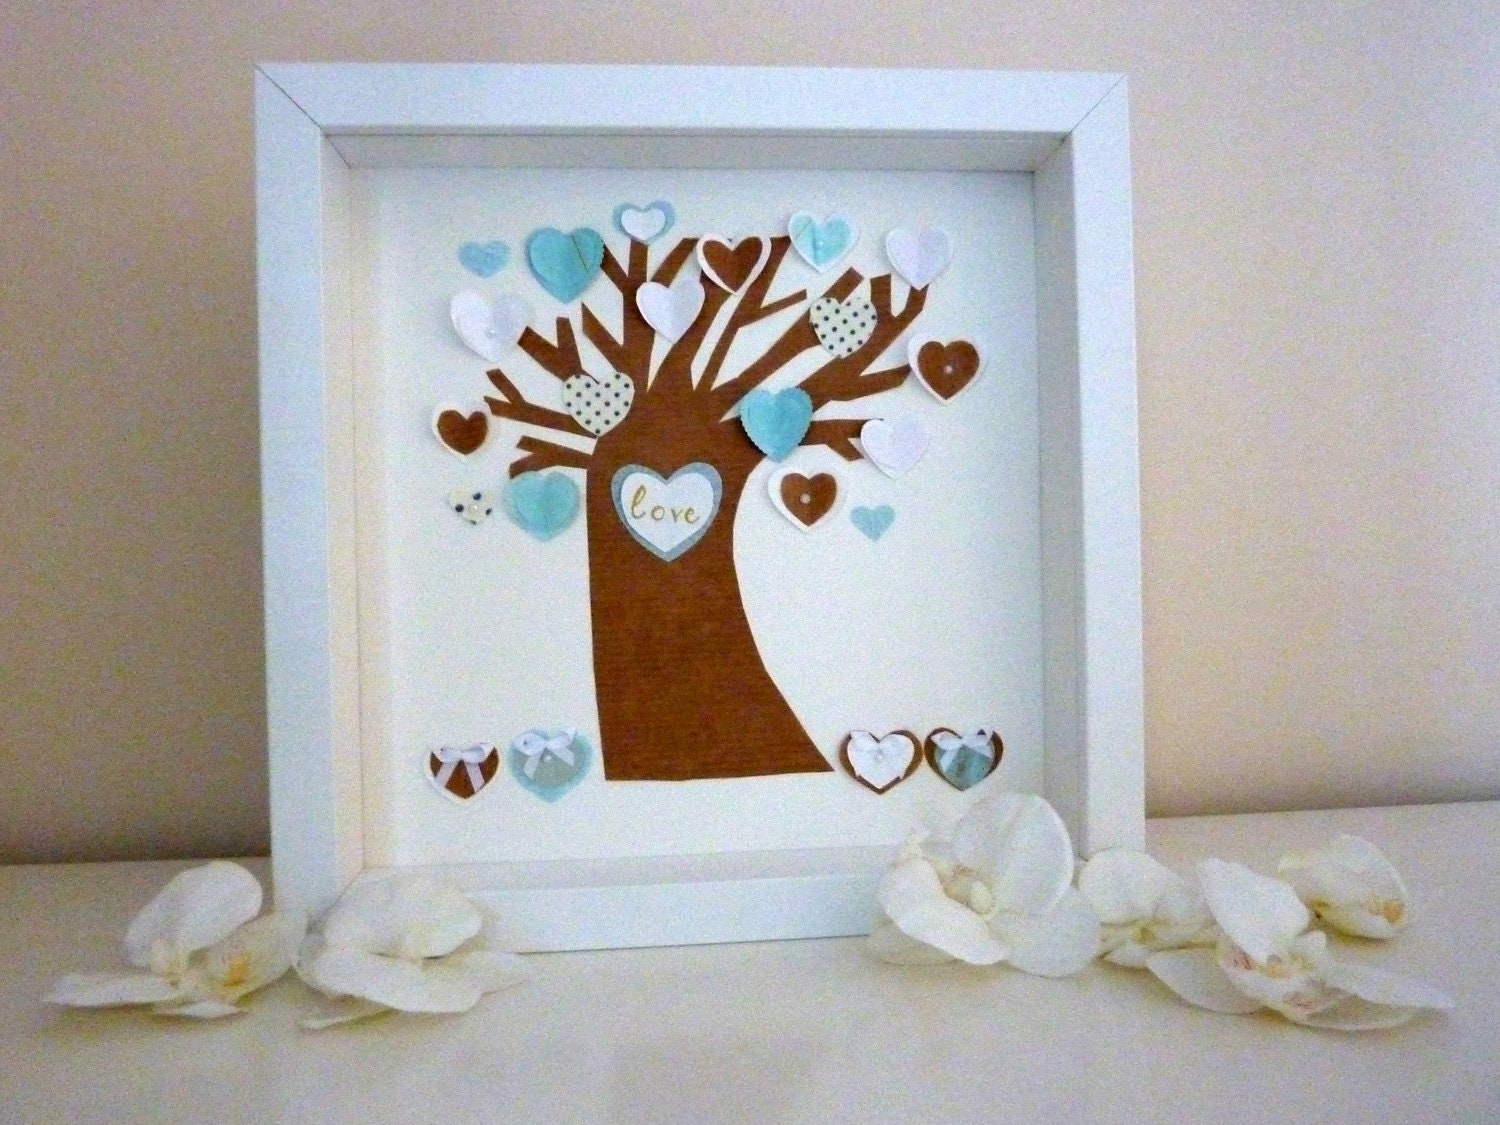 Personalized hearts tree, fabric and paper handmade picture, gift for wedding/ new baby - CreatedWithLoveuk